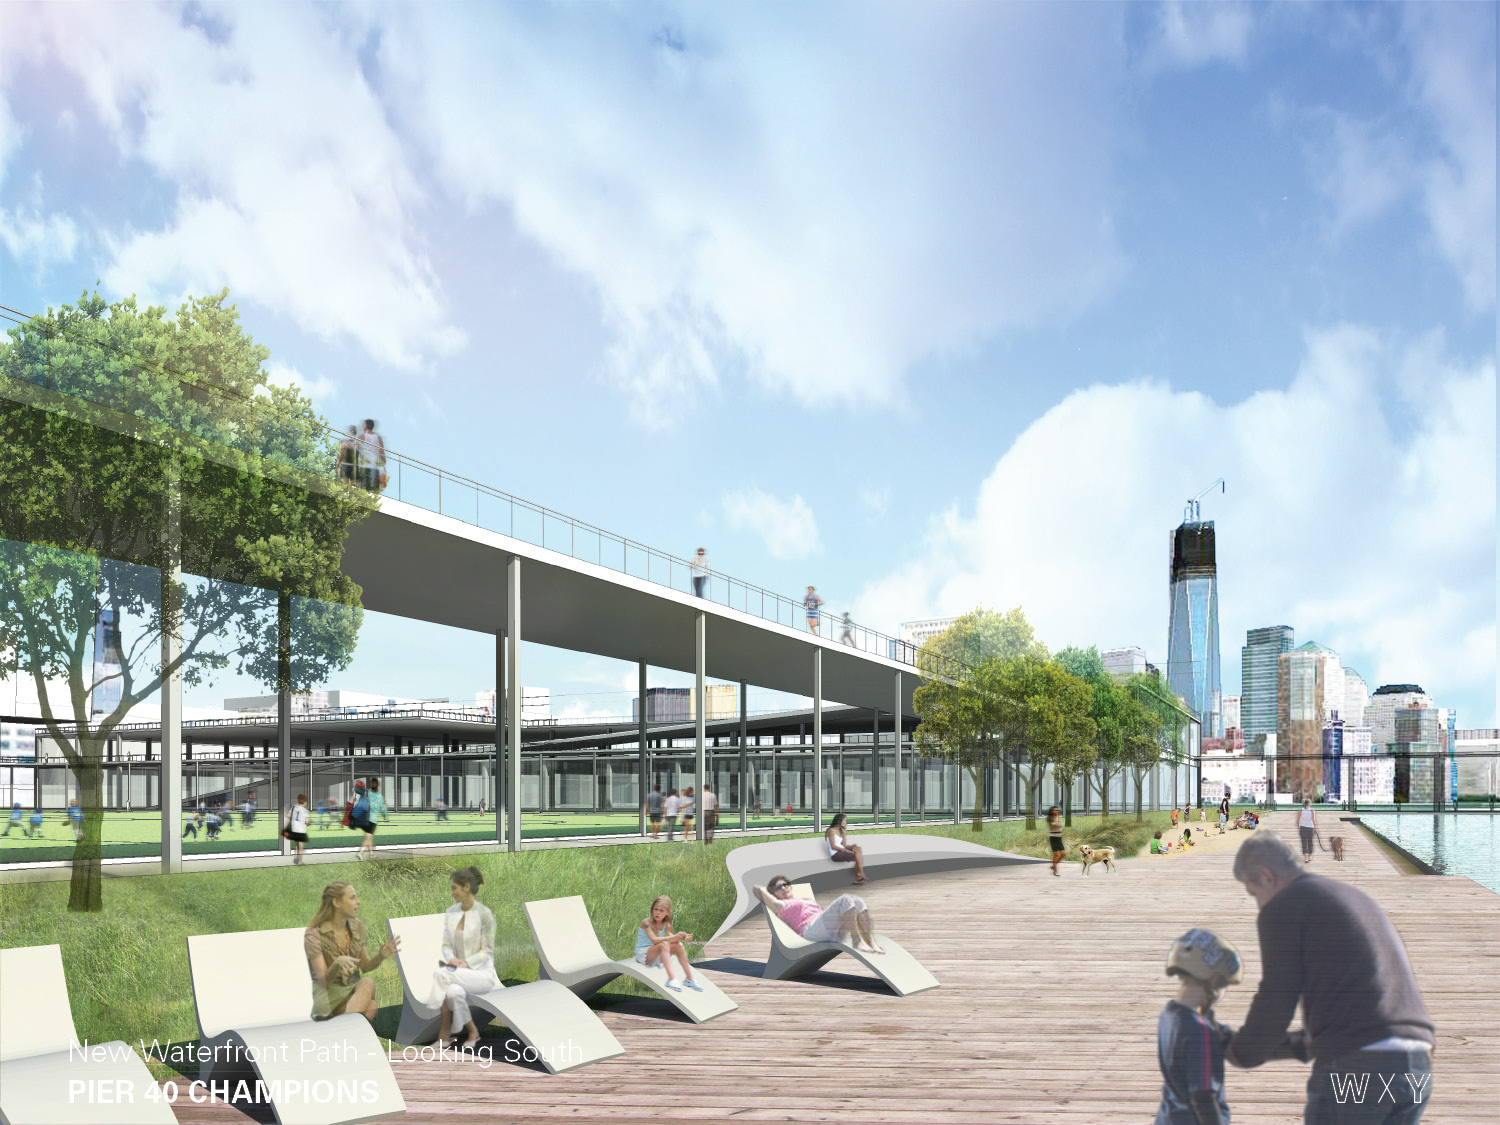 A rendering of how the west side of Pier 40 could look in the Pier 40 Champions proposal.